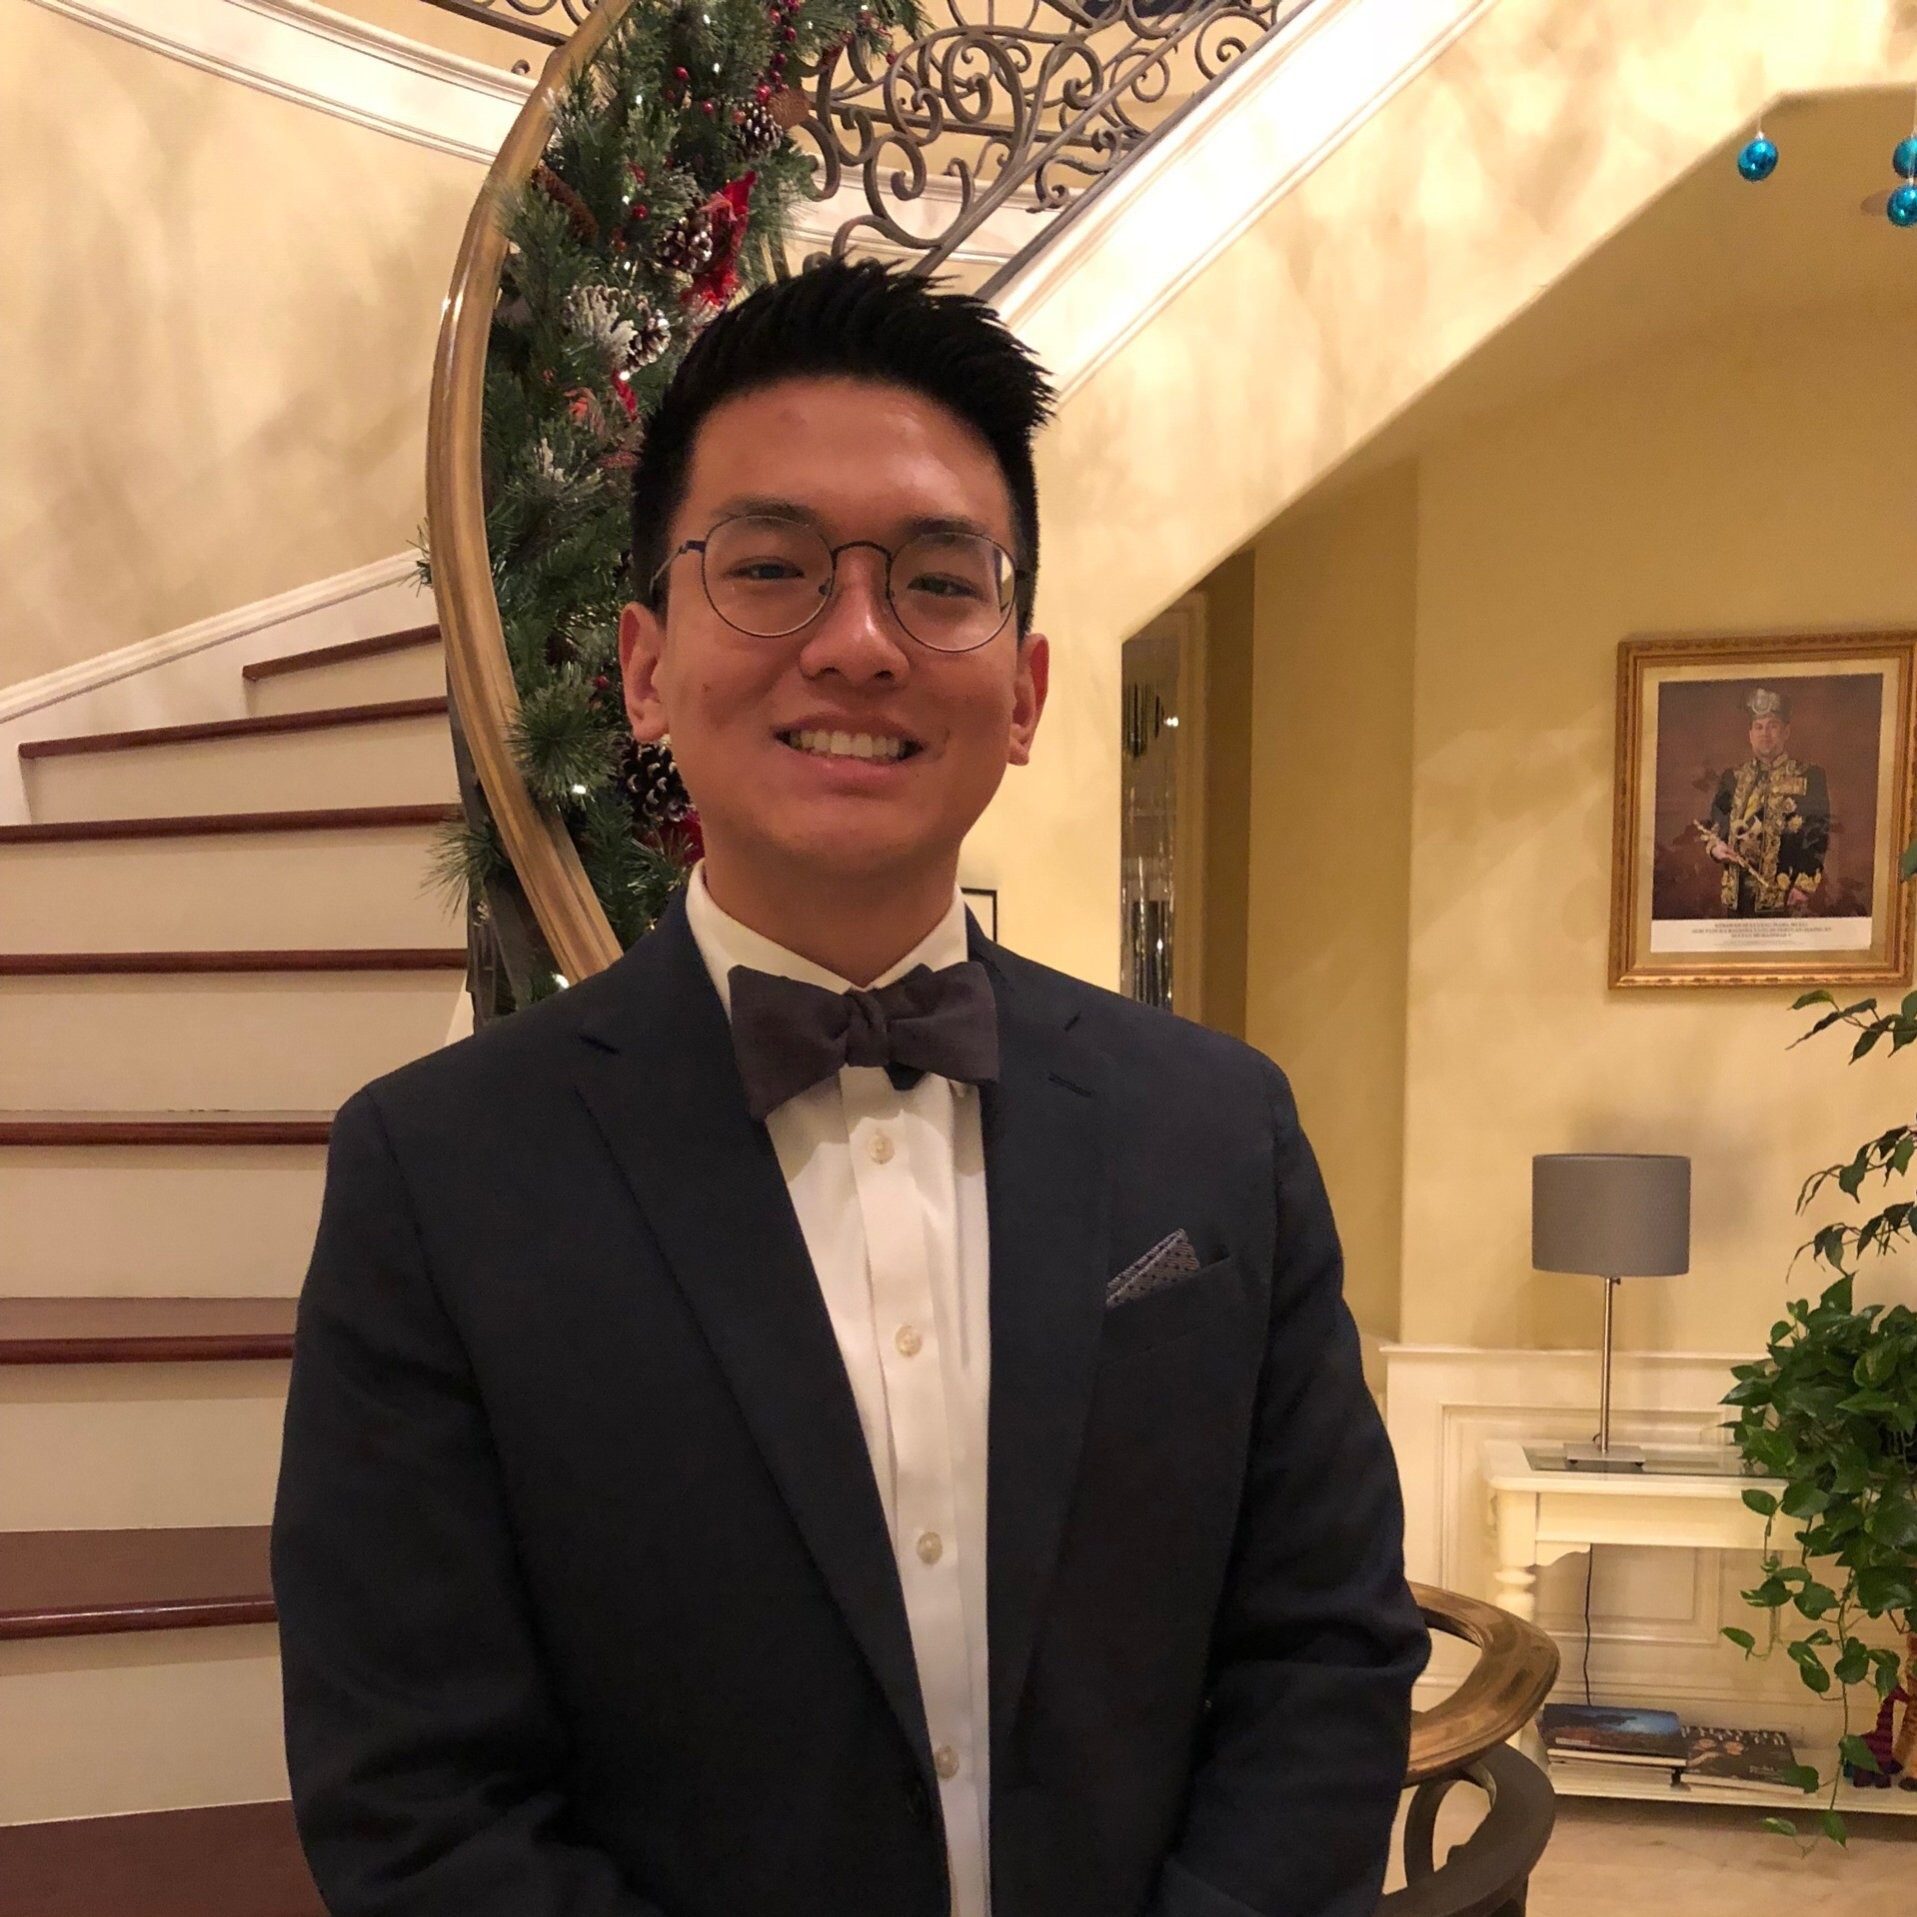 Asian male in a tux smiling